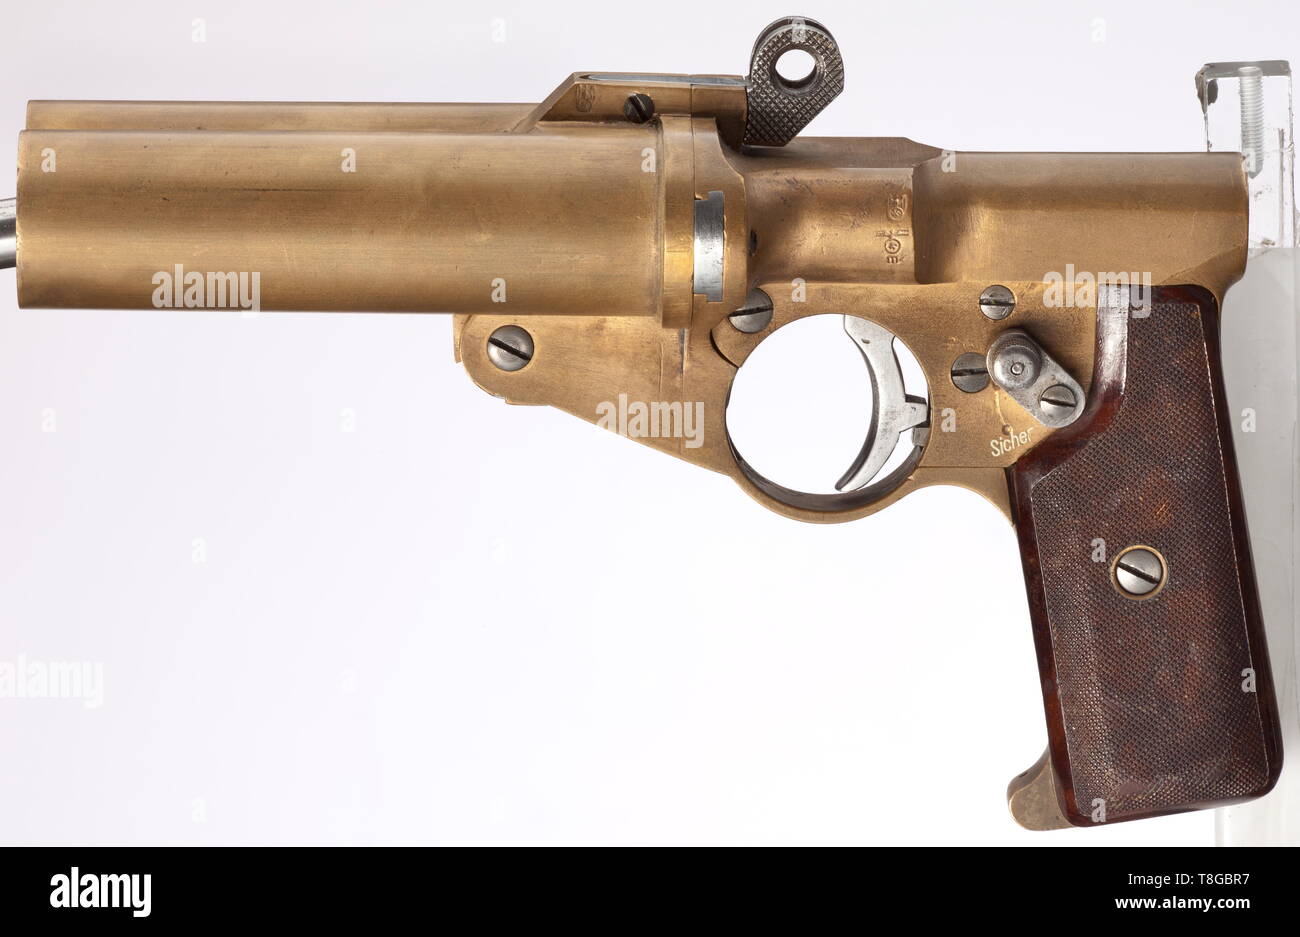 A double-barrelled signal pistol mod. A.W.W, Third Reich, navy Cal. 4, no. 15. Matching numbers. Good drop barrels with snapper locks, length 113 mm. Total length 217 mm. Weight 1300 g. Interior hammer. Safety. Signal pin. No barrel selector button. Construction attributed to Artilleriewerkstätten Wilhelmshaven. Slightly modified model. On left side of barrel latch and on bolt housing navy acceptance marks eagle/swastika/M, on pommel inventory no. '0 388' standing for Baltic Sea Fleet. No further stamps or inscriptions. Brass grip frame and barrels. The smooth trigger, the , Editorial-Use-Only Stock Photo